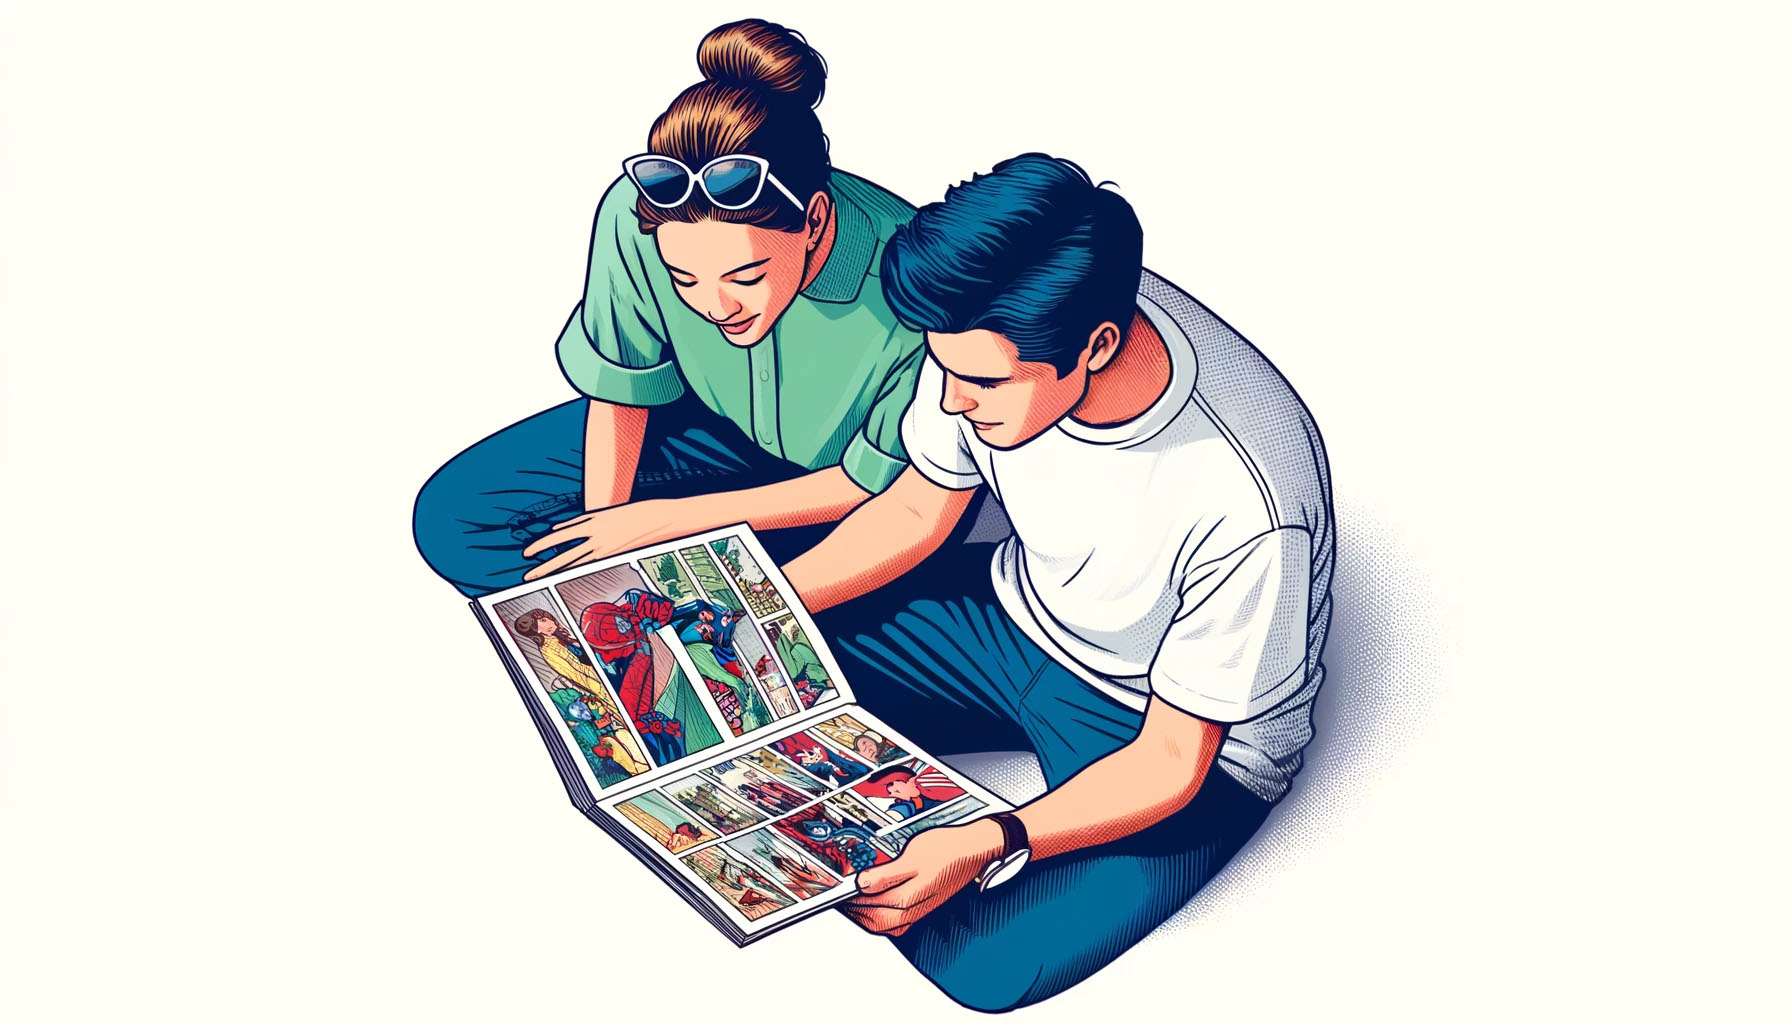 Comic Books Statistics By Demographics and Category